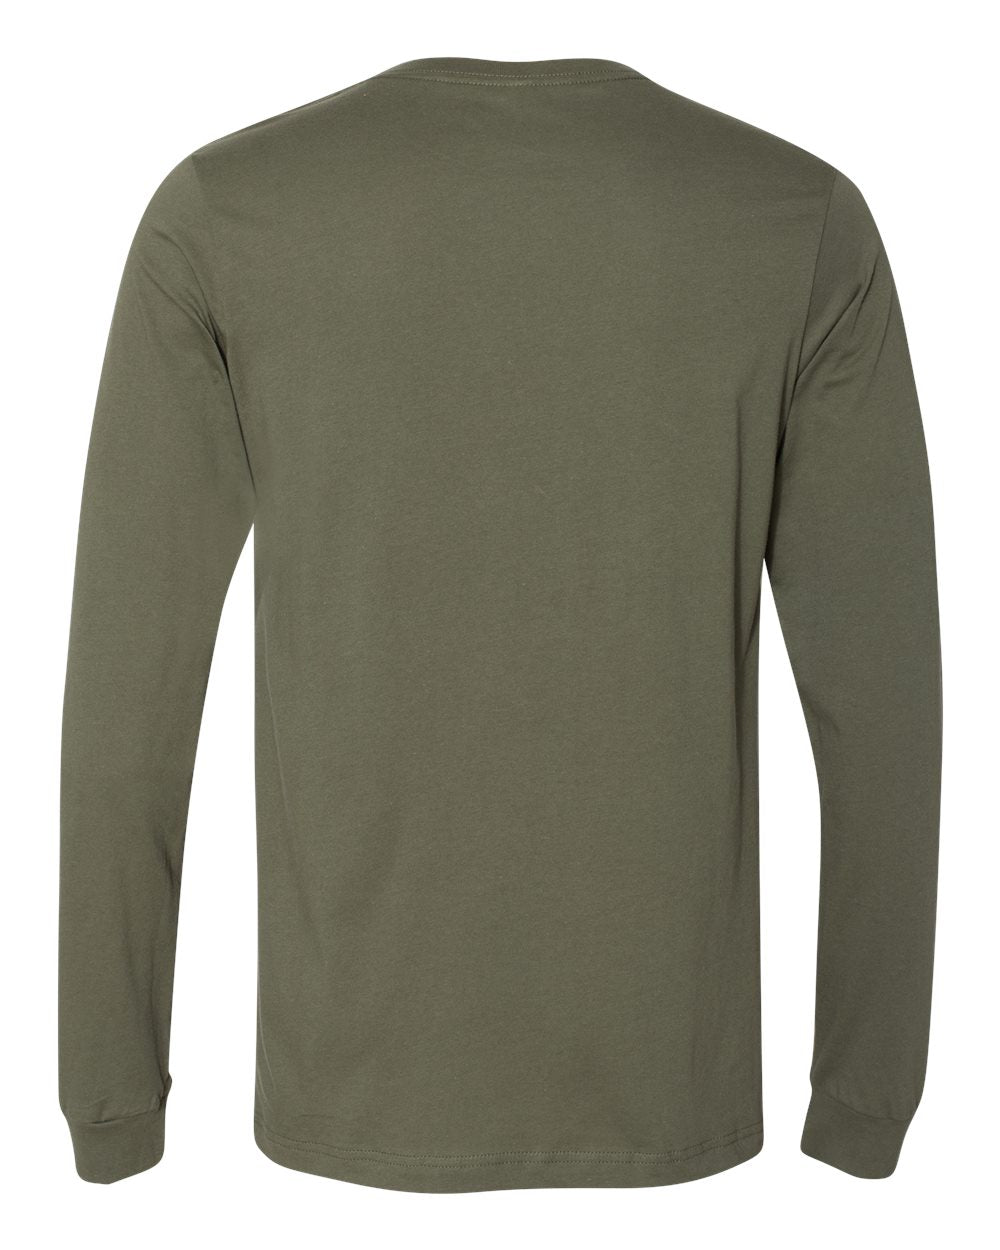 BELLA + CANVAS Unisex Jersey Long Sleeve Tee 3501 #color_Military Green